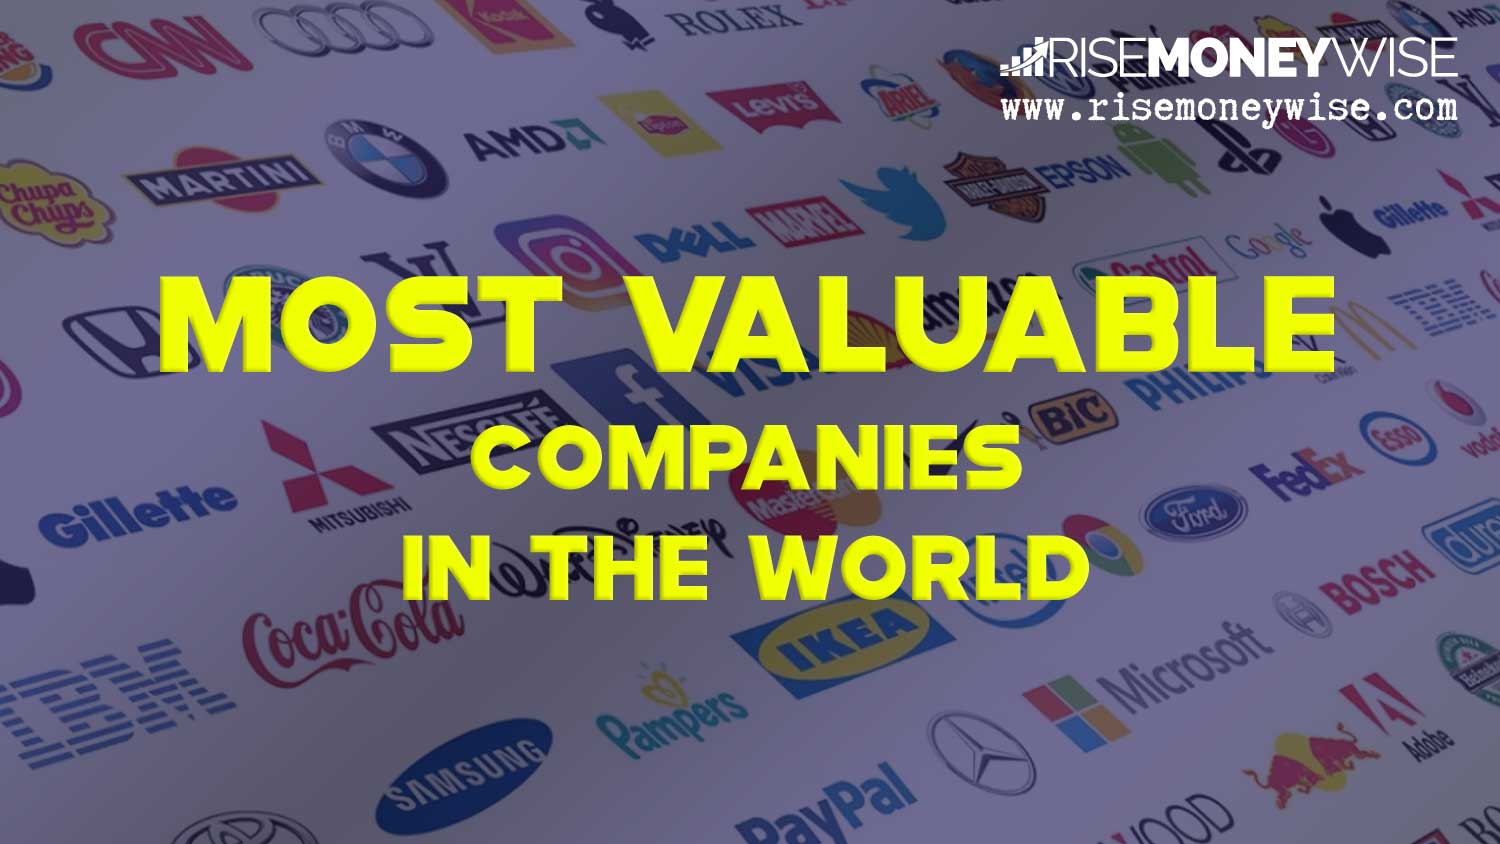 logos representing some of the most valuable companies